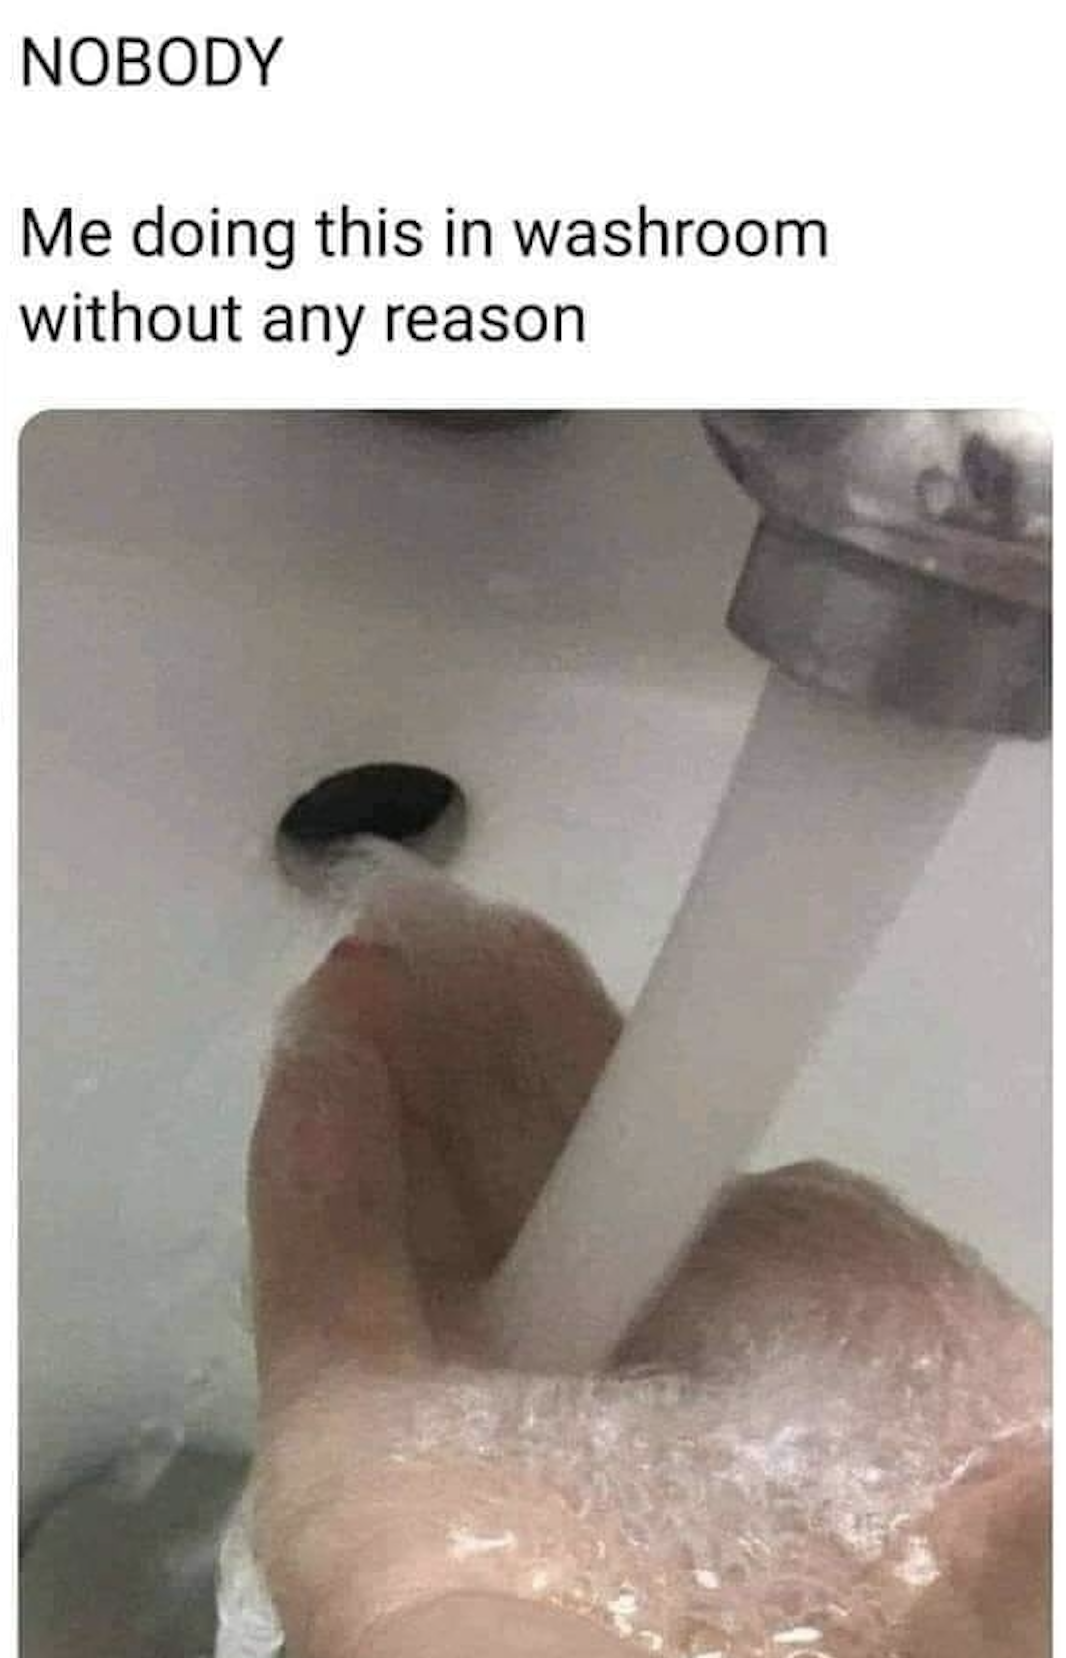 Picture of a hand bending water into that little hole in a sink